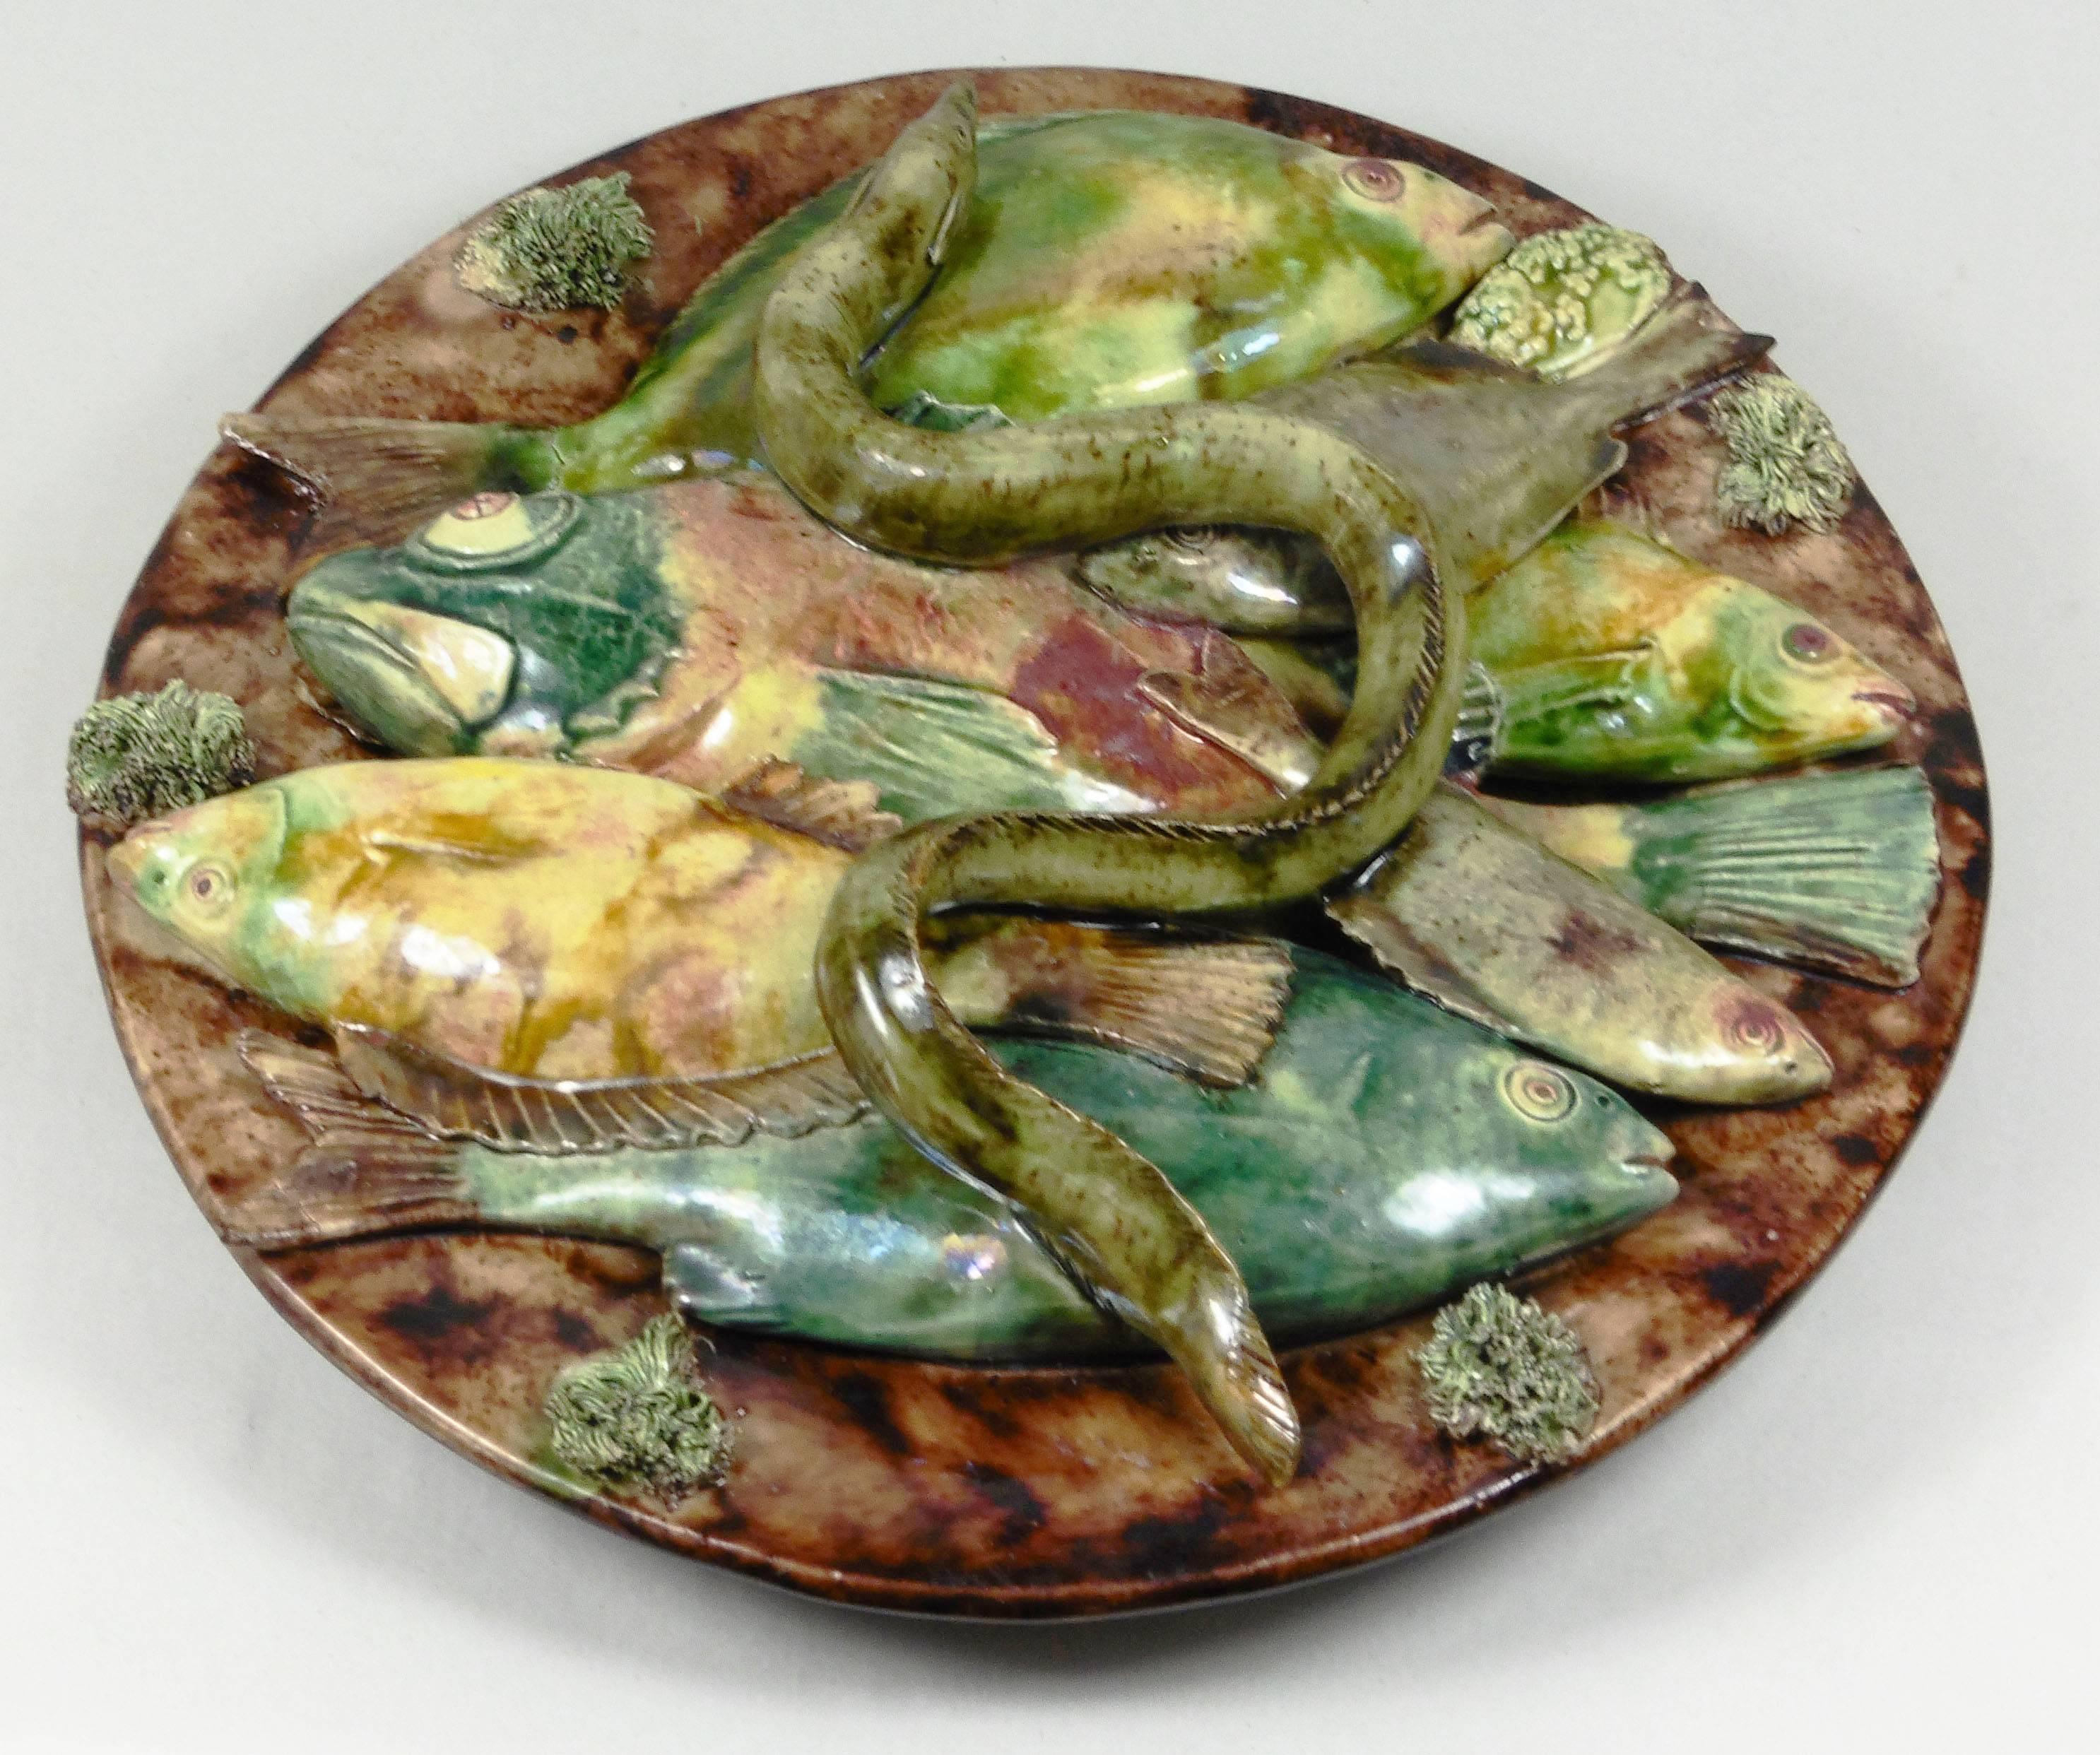 19th century Palissy Portuguese wall platter signed Jose Alves Cunha ( Caldas da Rainha )
The platter have seven differents fishes and one eel on the top.